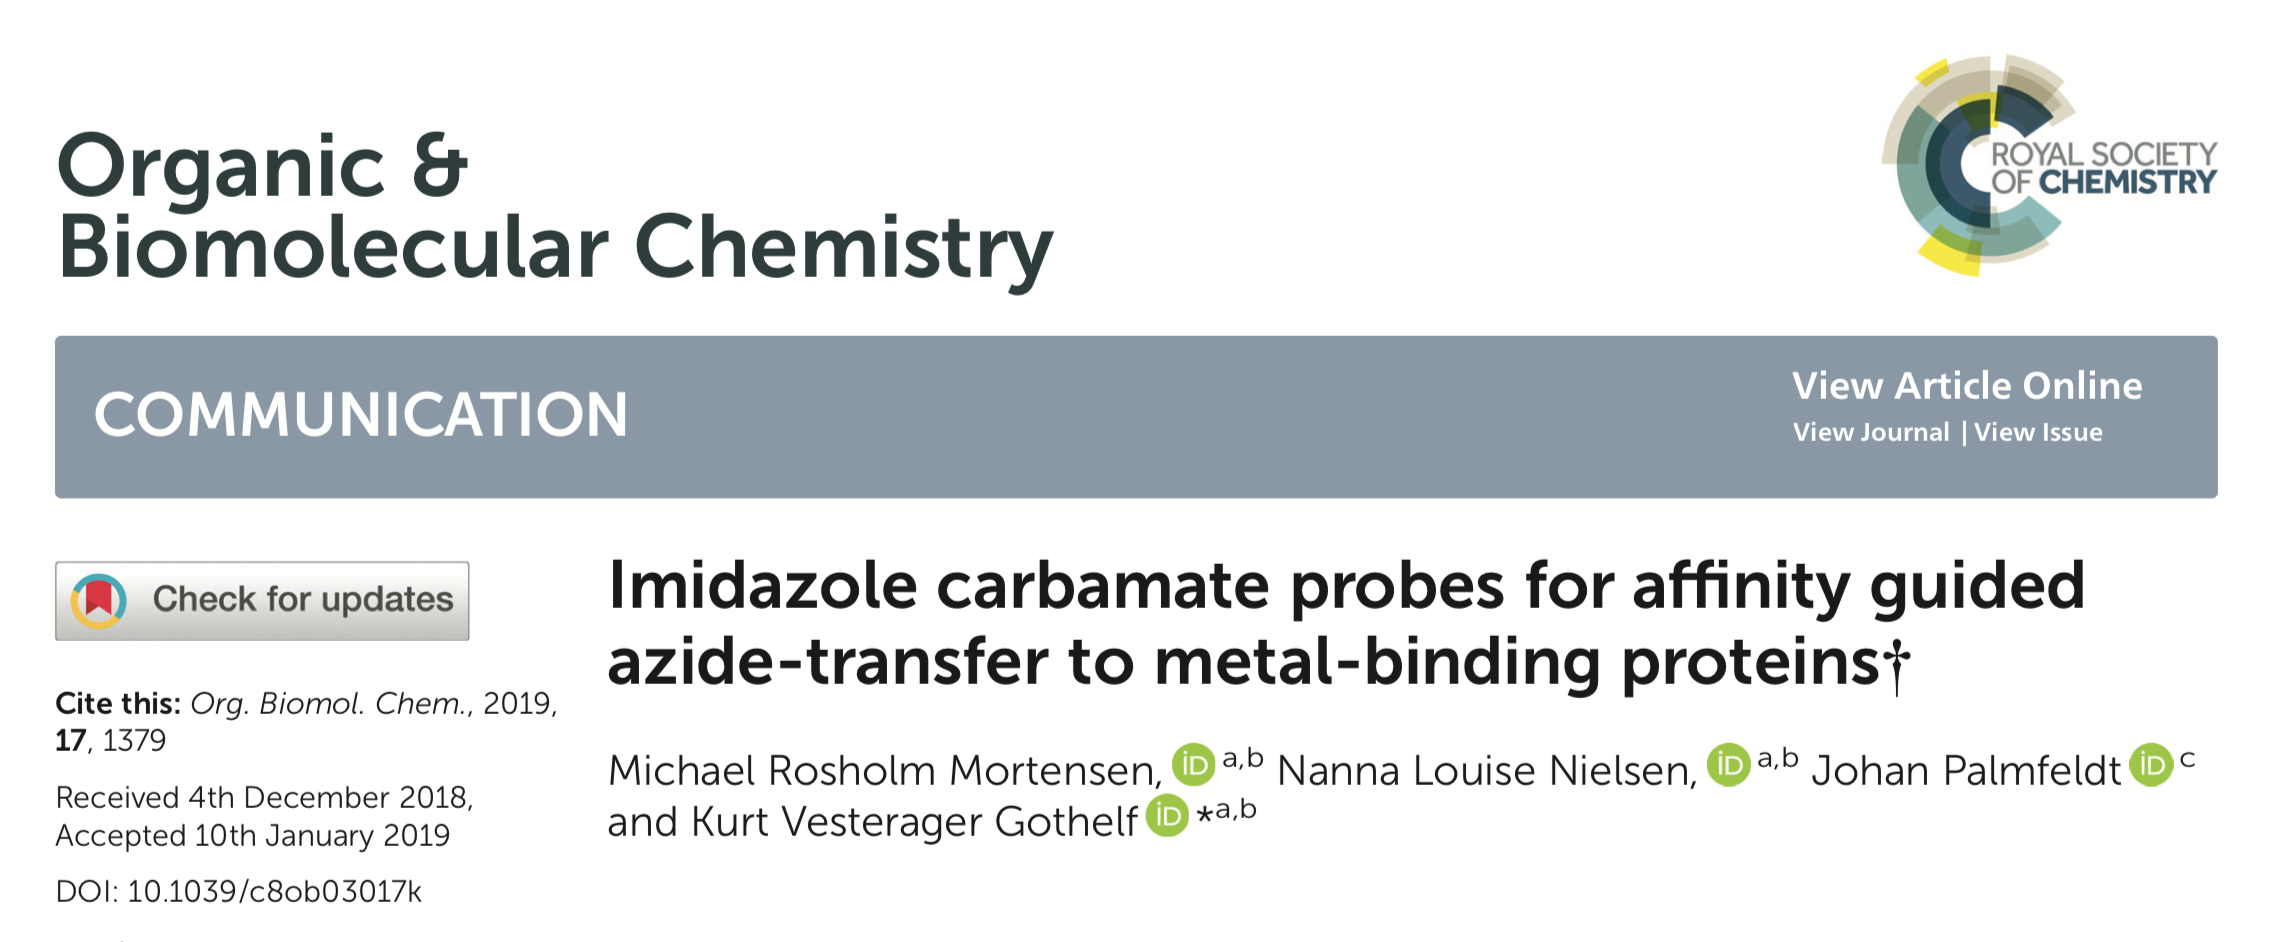 Screenshot from the article "Imidazole Carbamate Probes for Affinity Guided Azide-Transfer to Metal-Binding Proteins" published in the journal Organic and Biomolecular Chemistry.